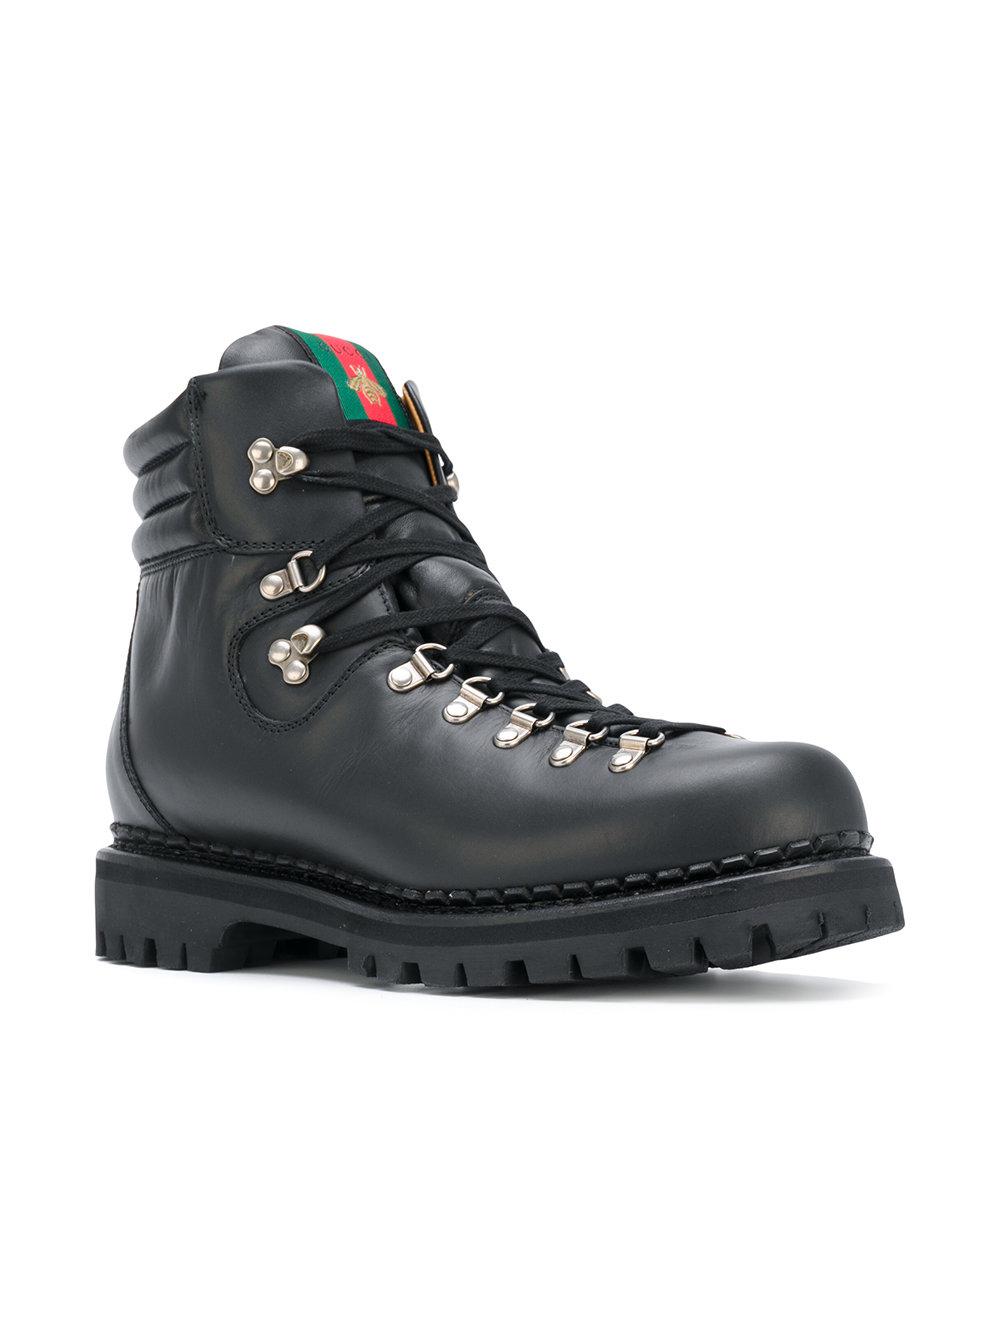 Gucci Leather Web Bee Hiking Boots in Black for Men - Lyst